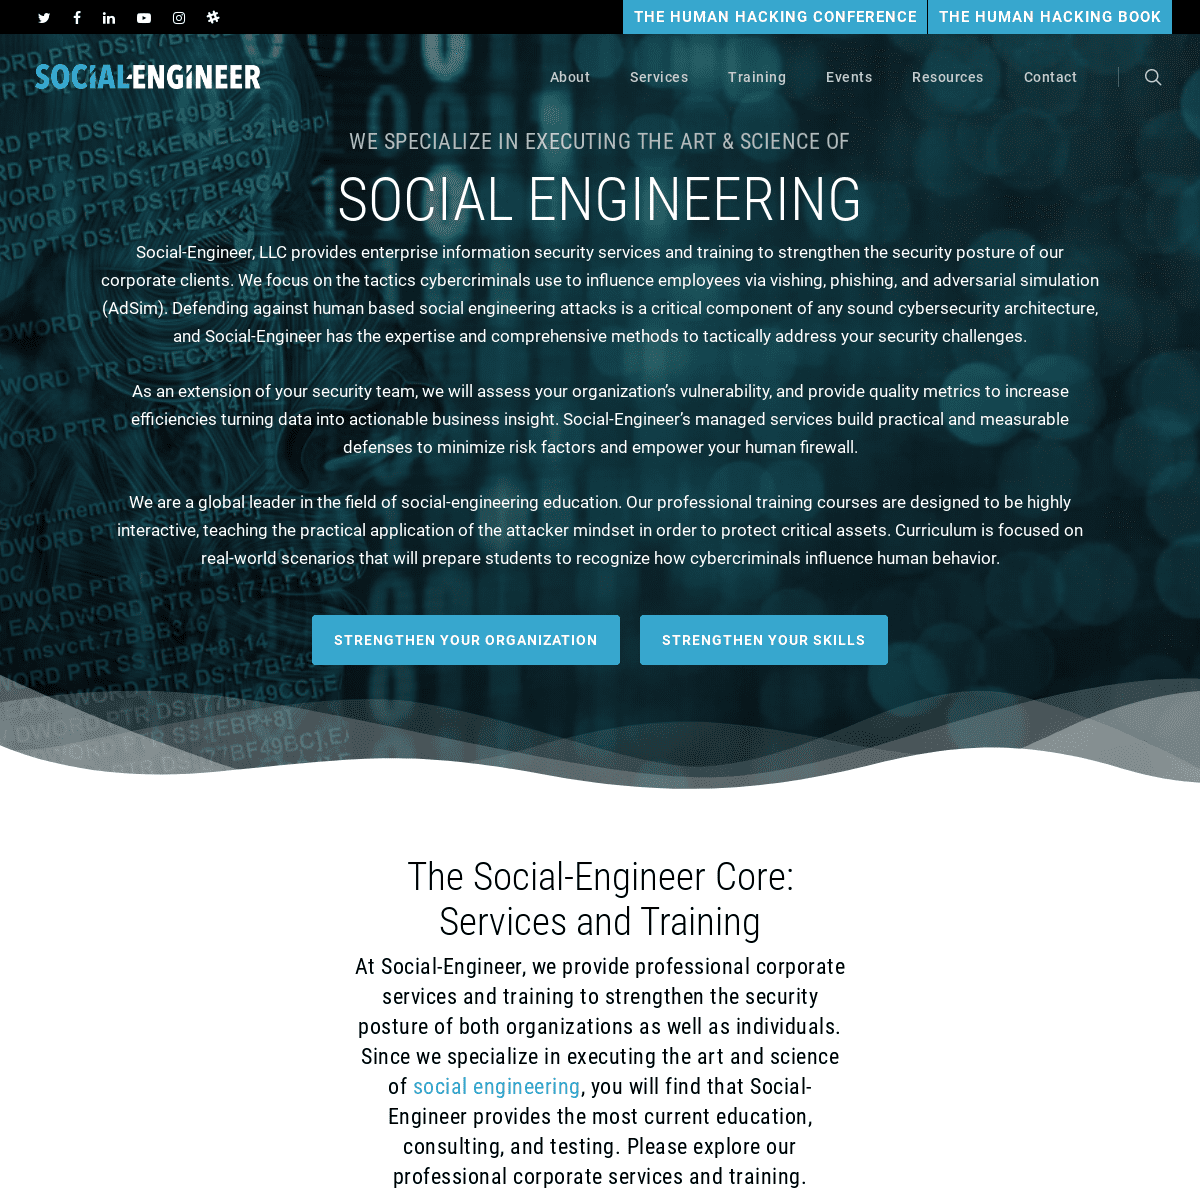 Social-Engineer Services and Training - Social-Engineer, LLC.